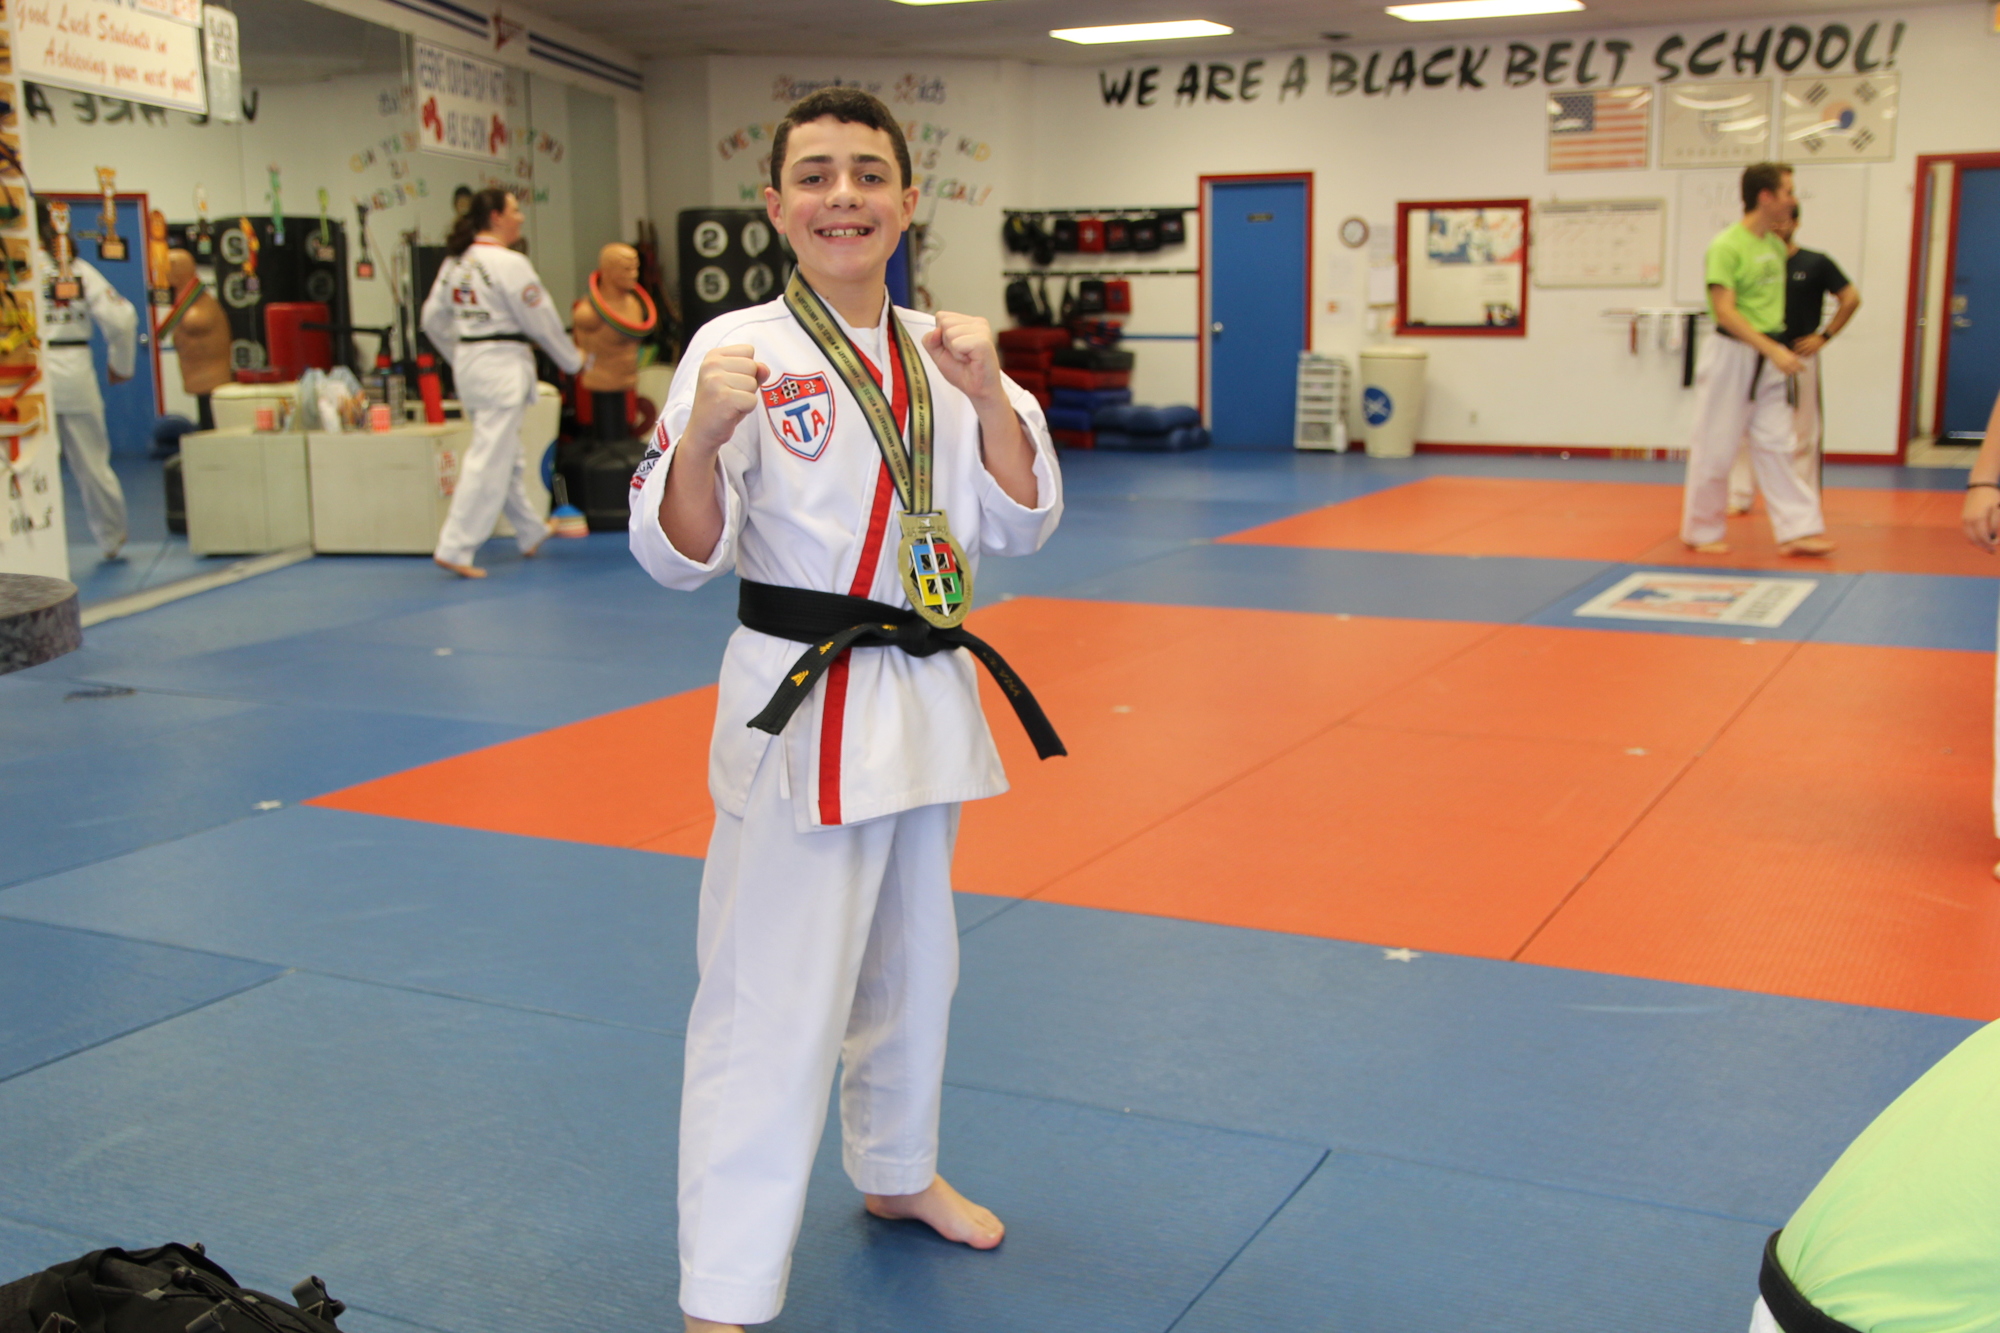 Ryan Geary, a second degree black belt, demonstrates a combat sparring pose. He is the first place world champion in his age group in Taekwondo for 2019. Photo by Tanya Russo